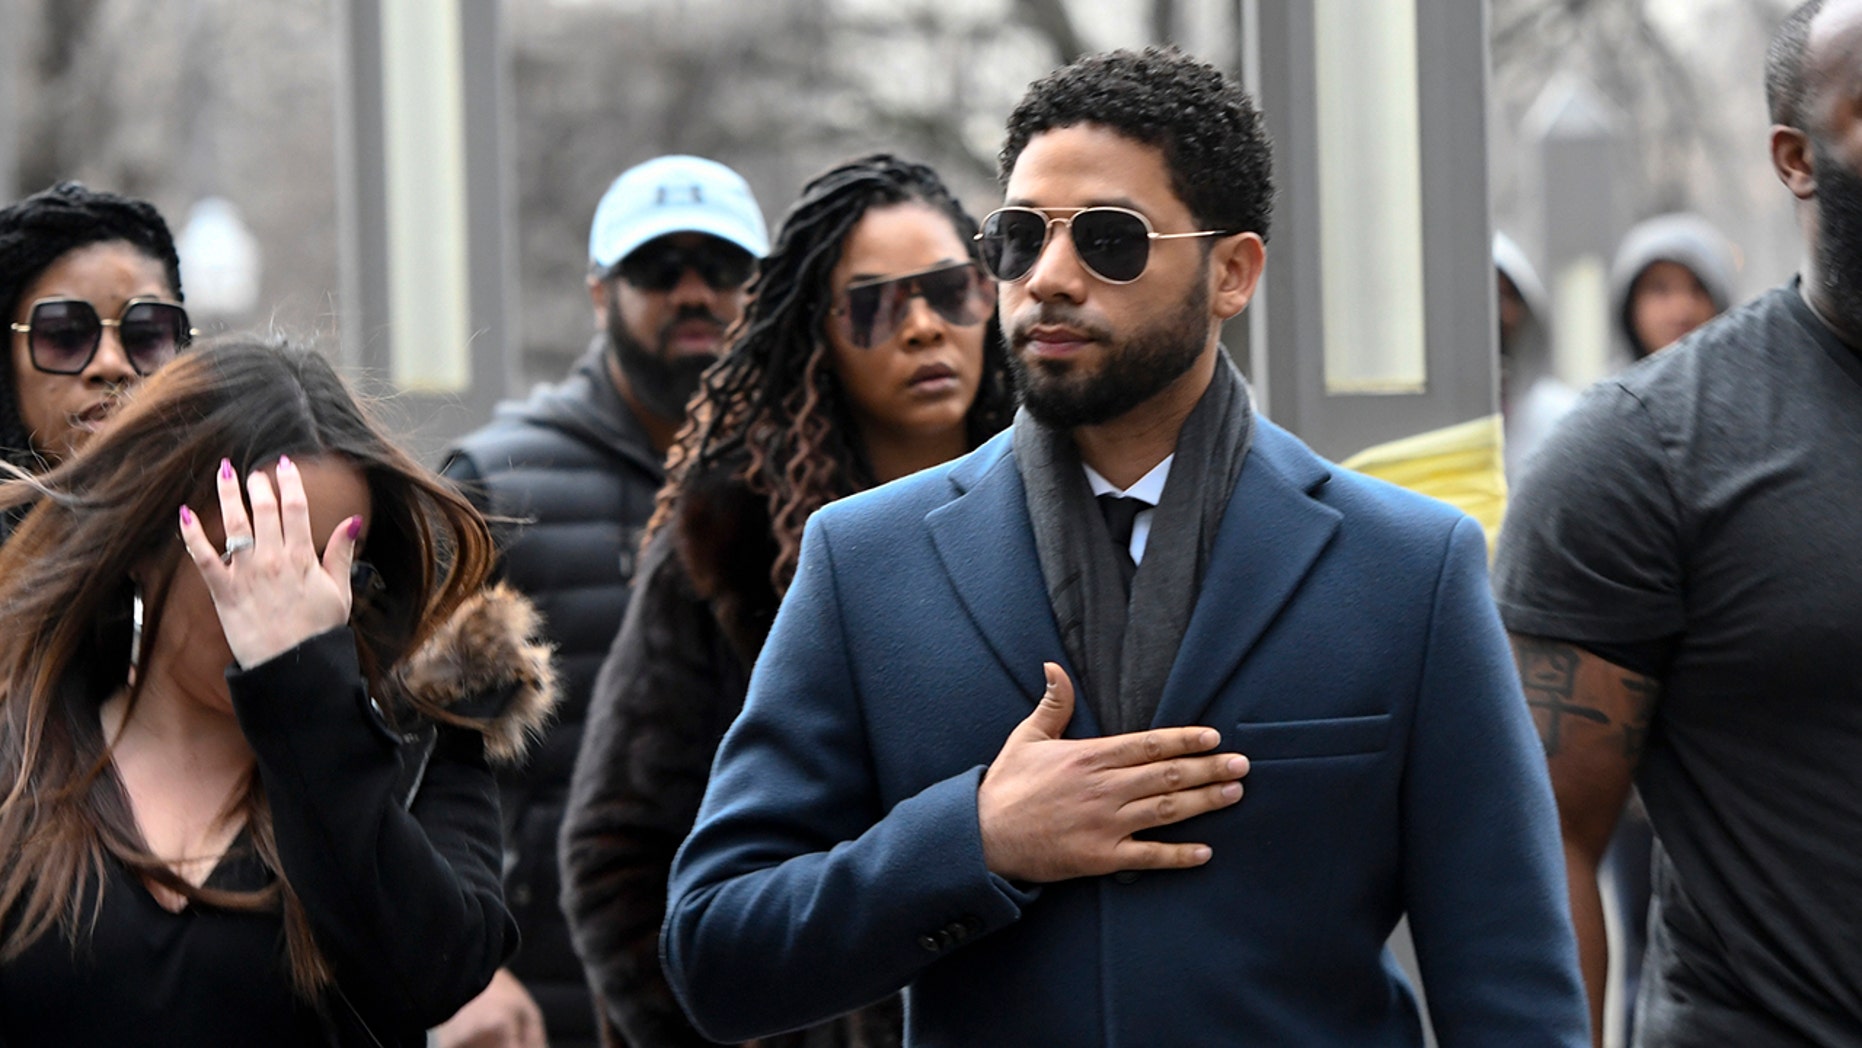 Jussie Smollett, who fooled the media and faced the backlash, beats the system | Fox News1862 x 1048